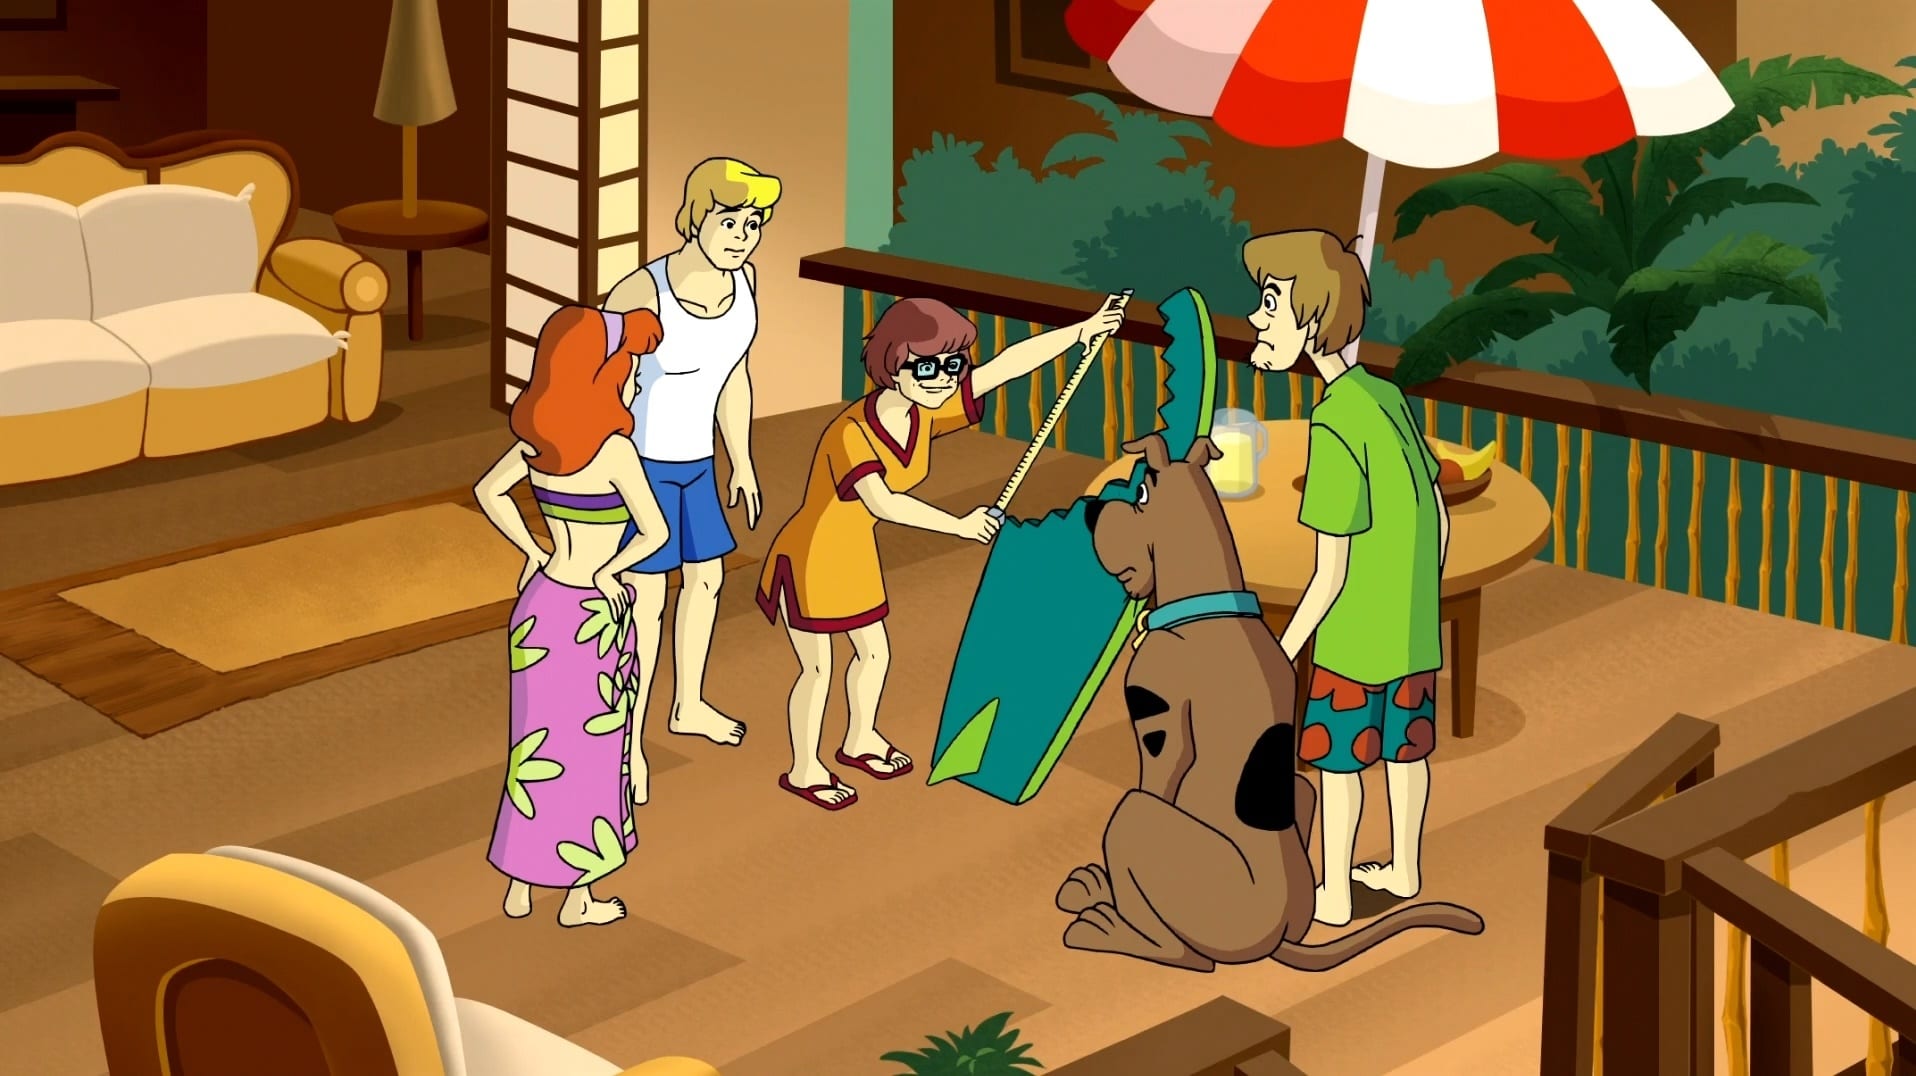 What's New, Scooby-Doo? Season 1 :Episode 9  She Sees Sea Monsters by the Sea Shore